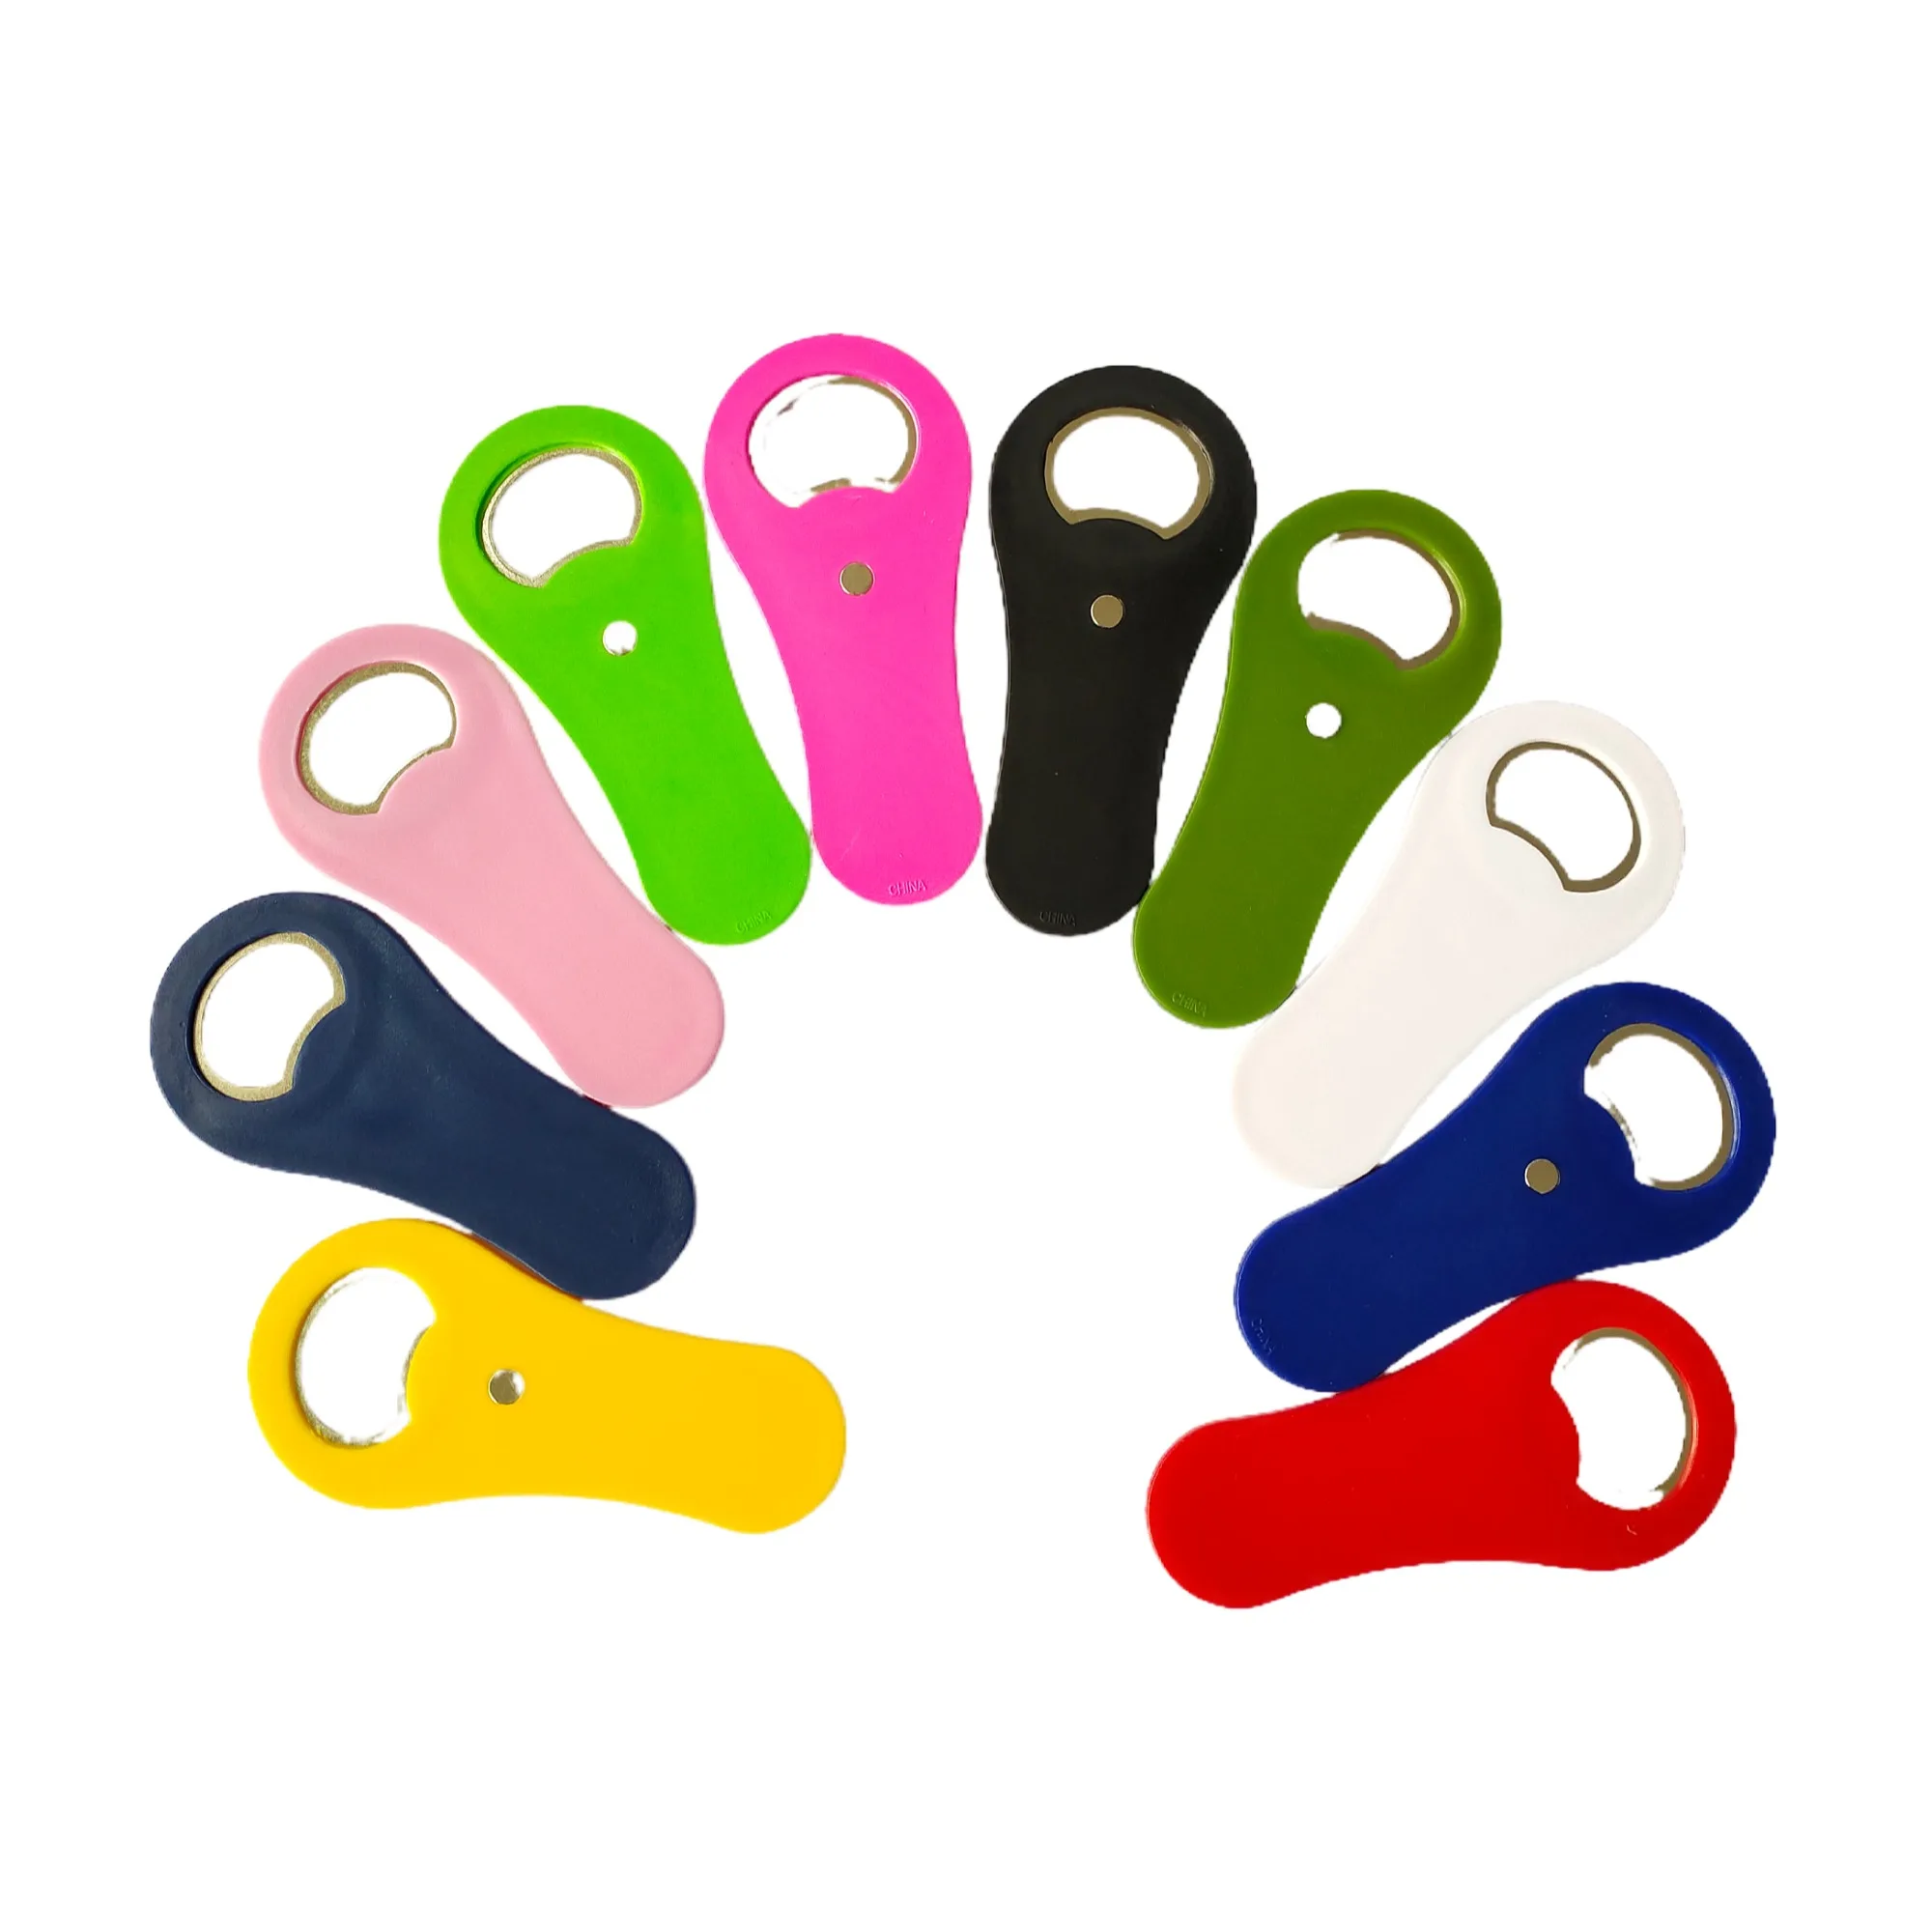 

colorful choices promotional giveaway for custom logo prints any quantity ABS magnetic oval plastic beer bottle opener